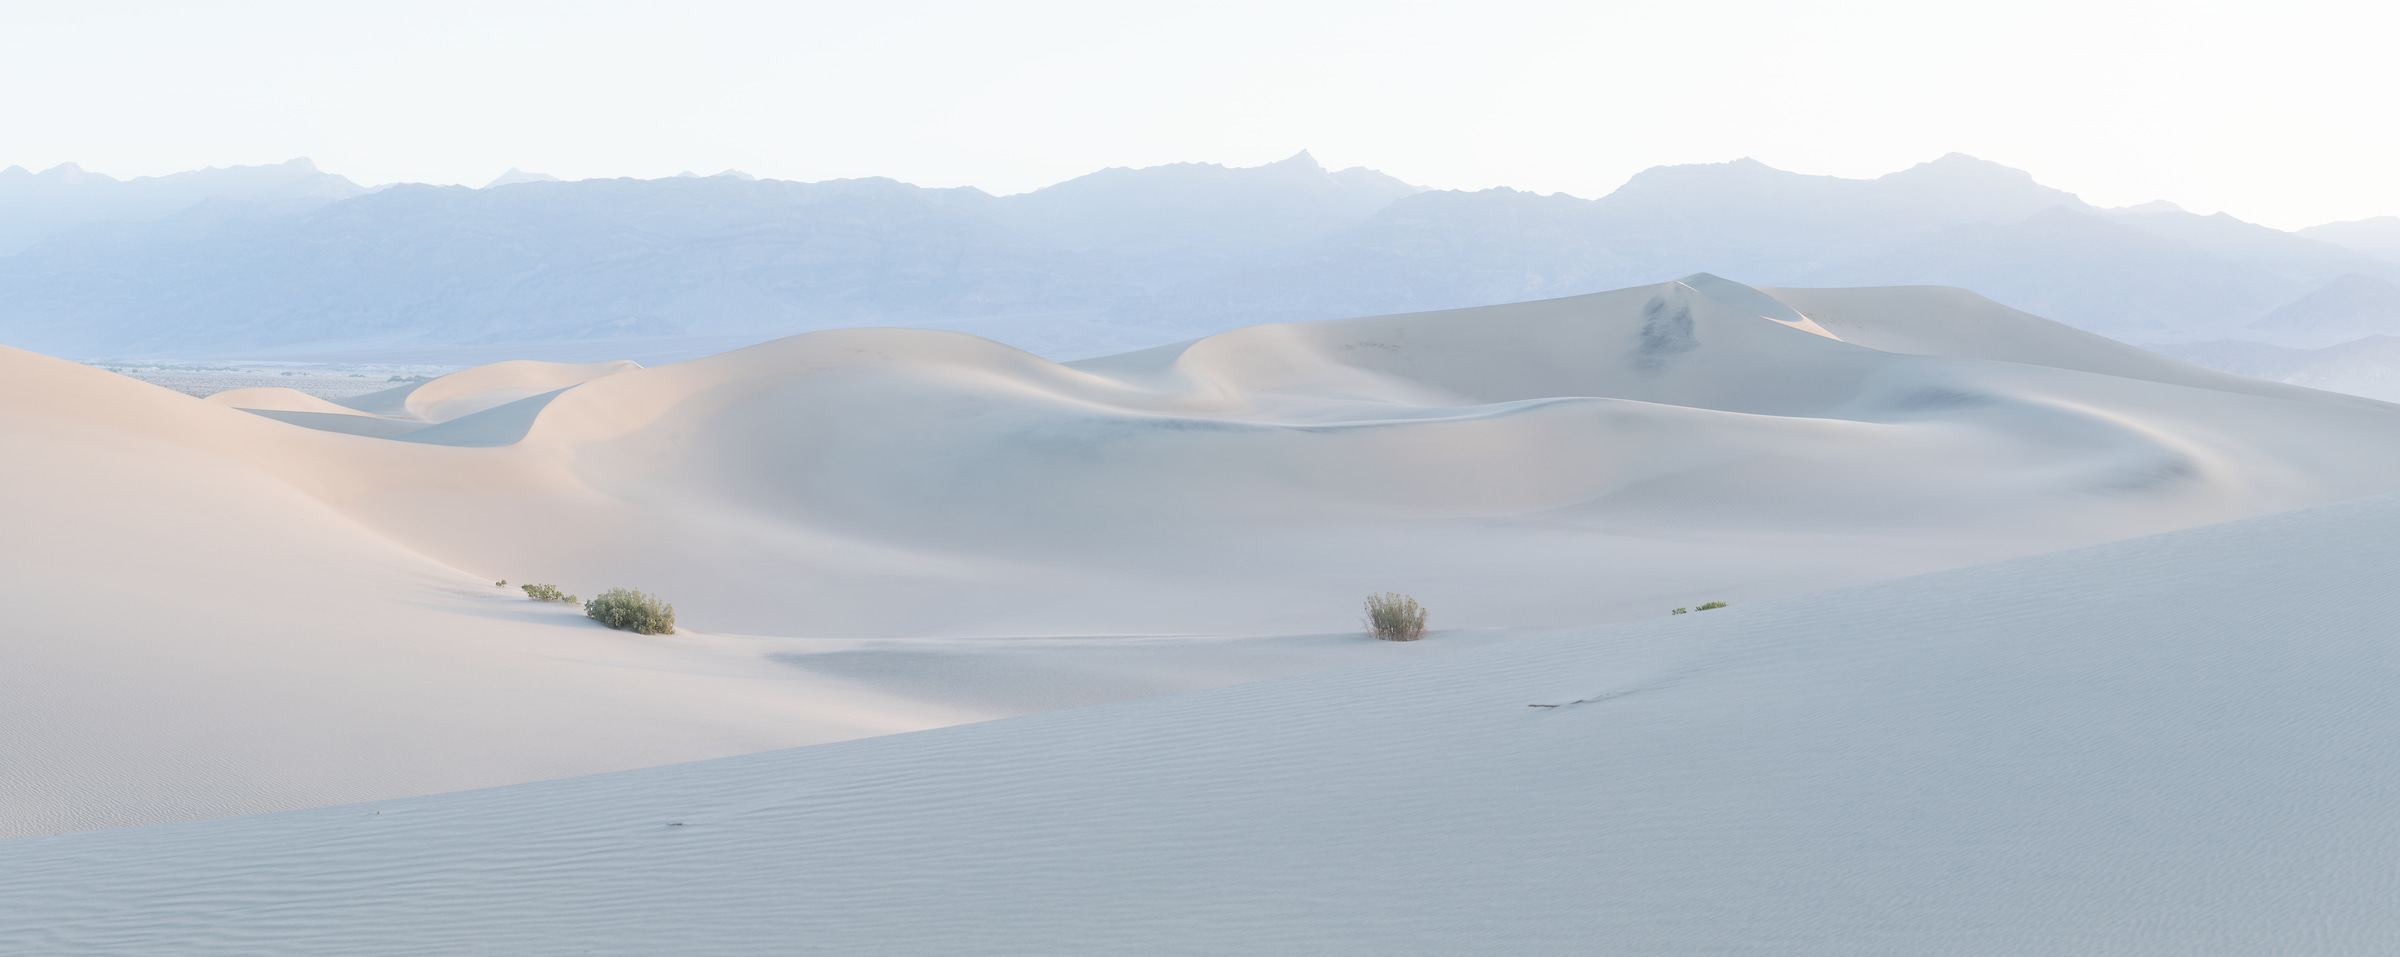 366 megapixels! A very high resolution, large-format VAST photo print of Mesquite Flat Sand Dunes in Death Valley National Park; landscape photograph created by Greg Probst in California.